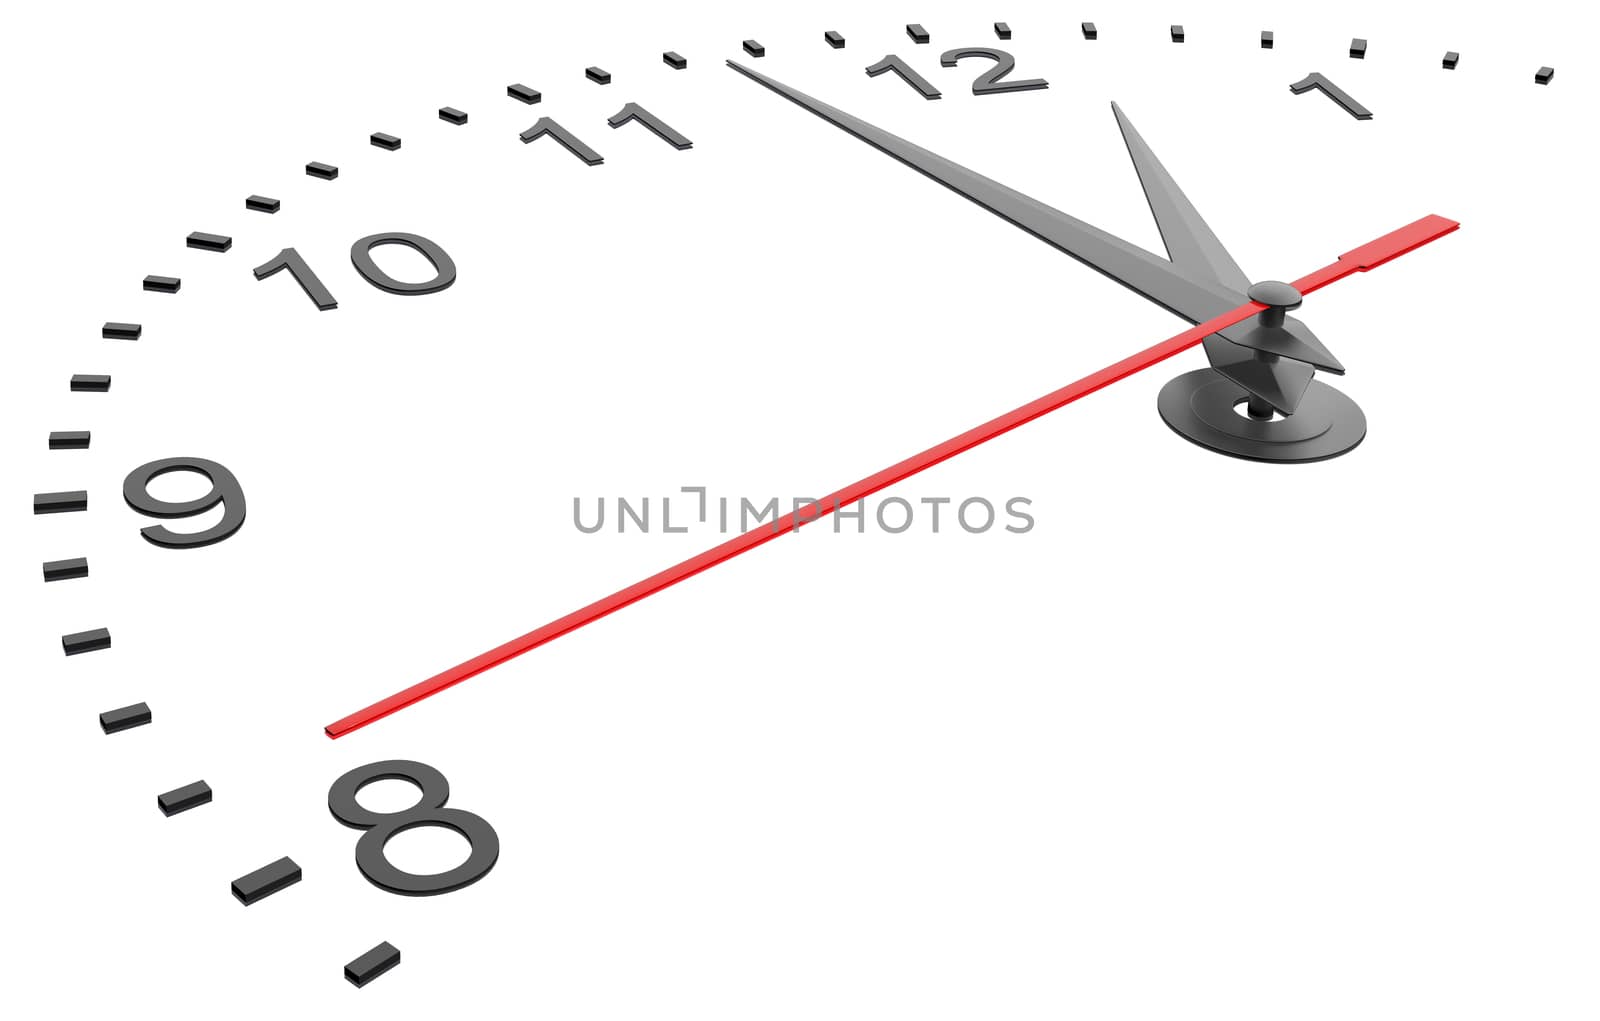 Clock face with numbers. Isolated 3D rendering on white background